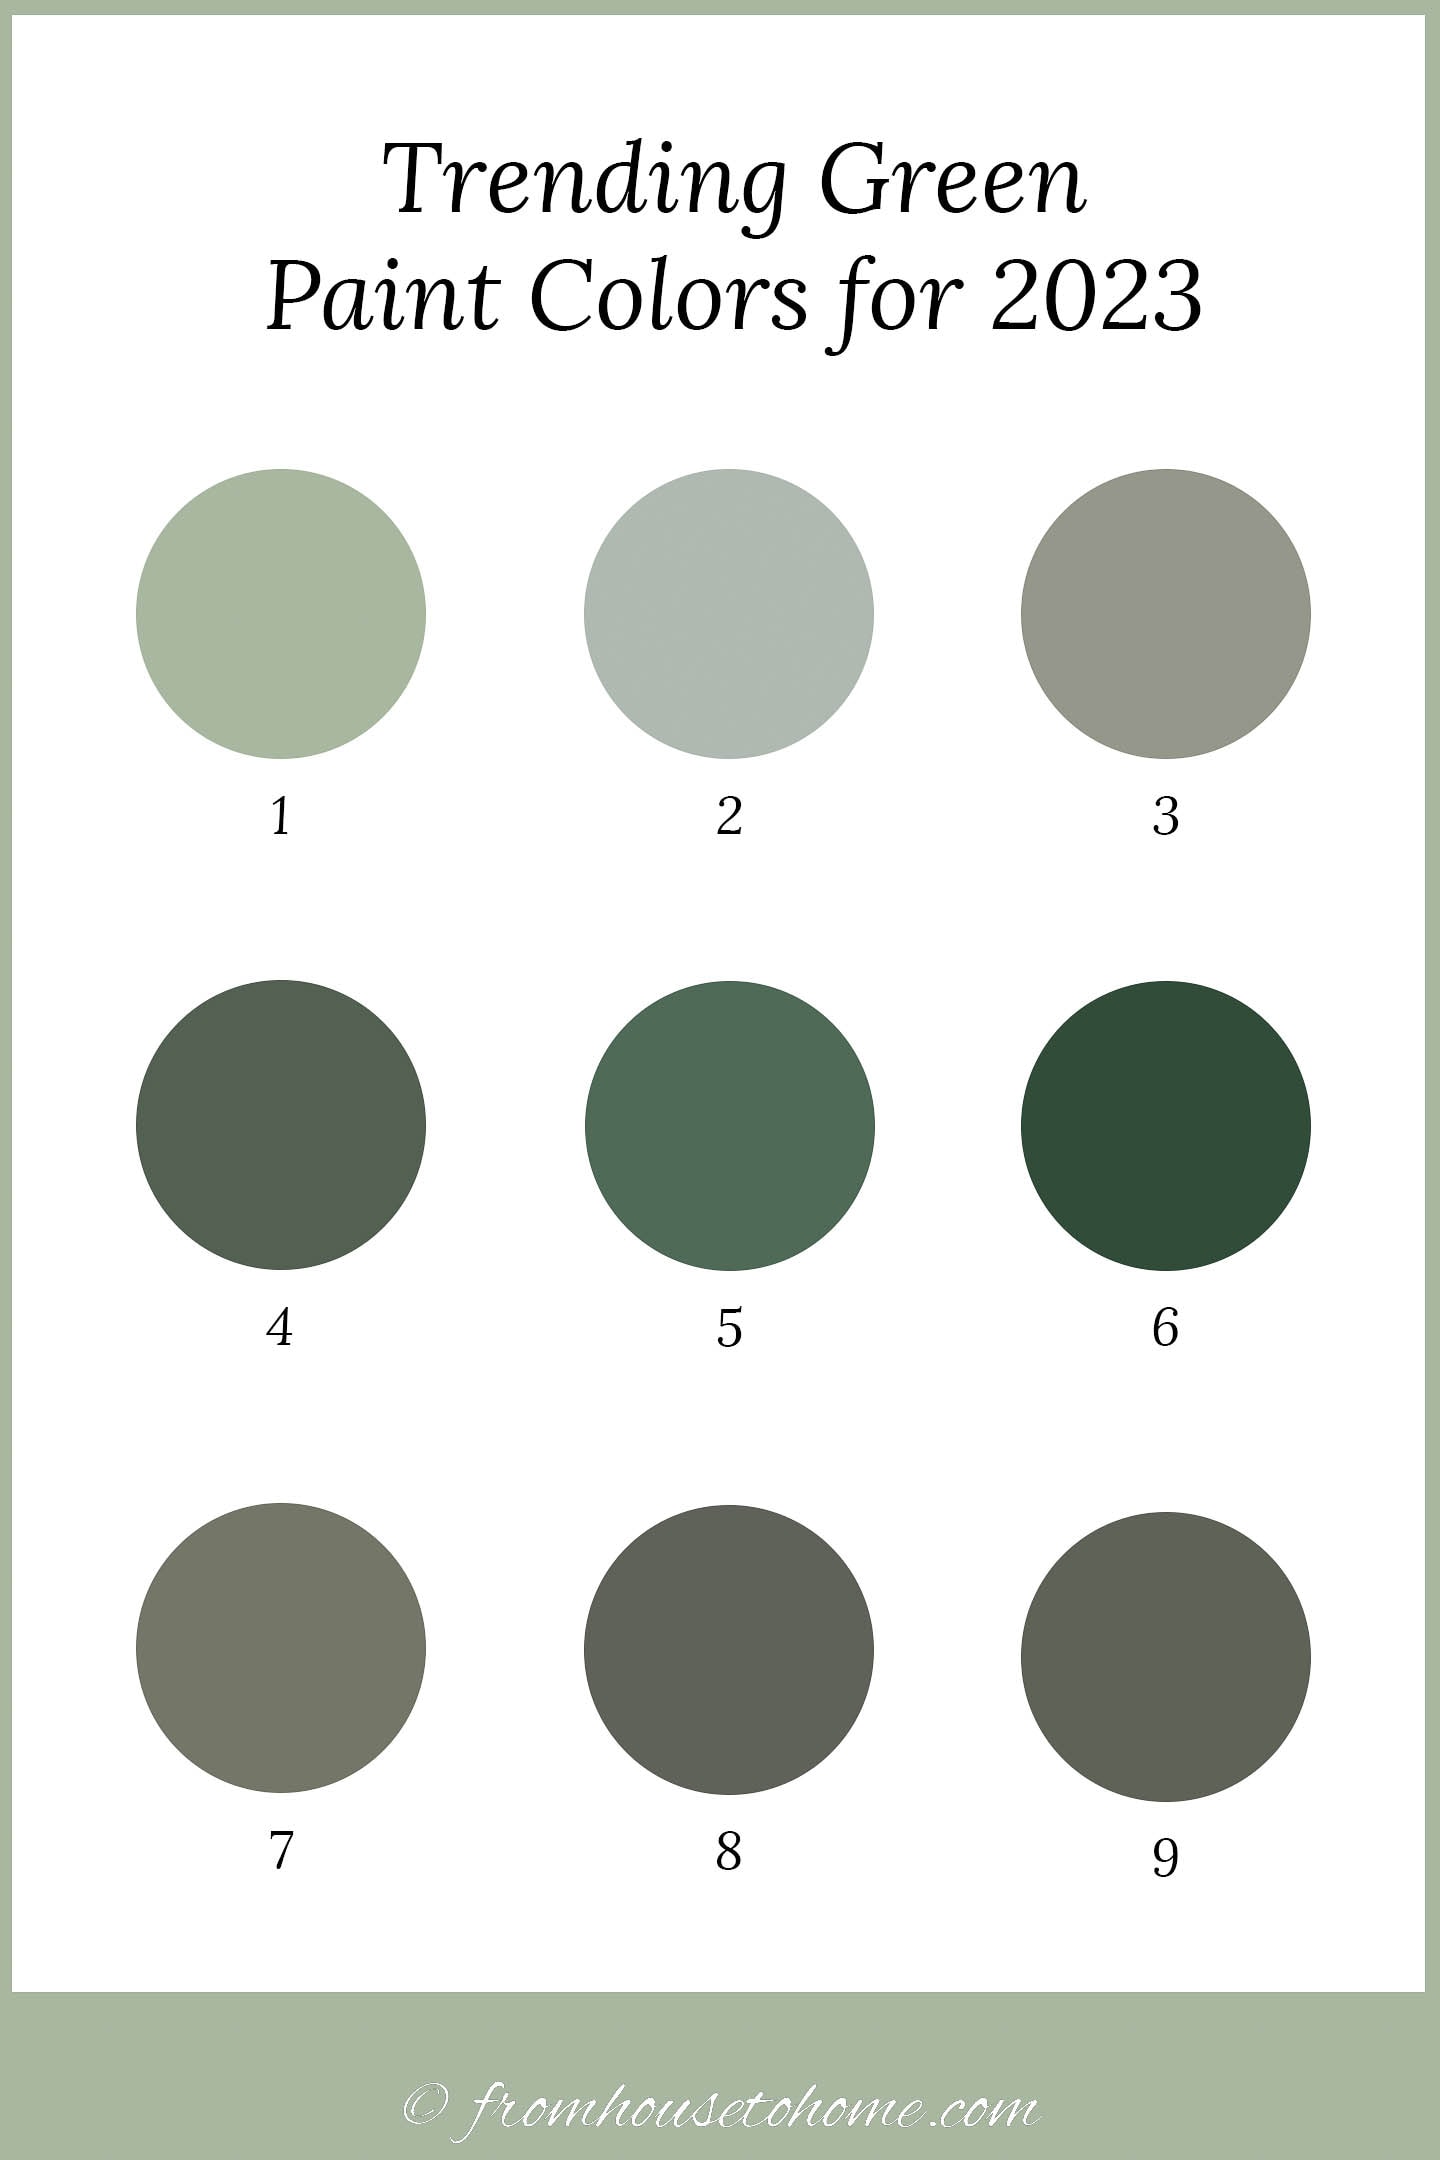 9 swatches of trending green paint colors for 2023